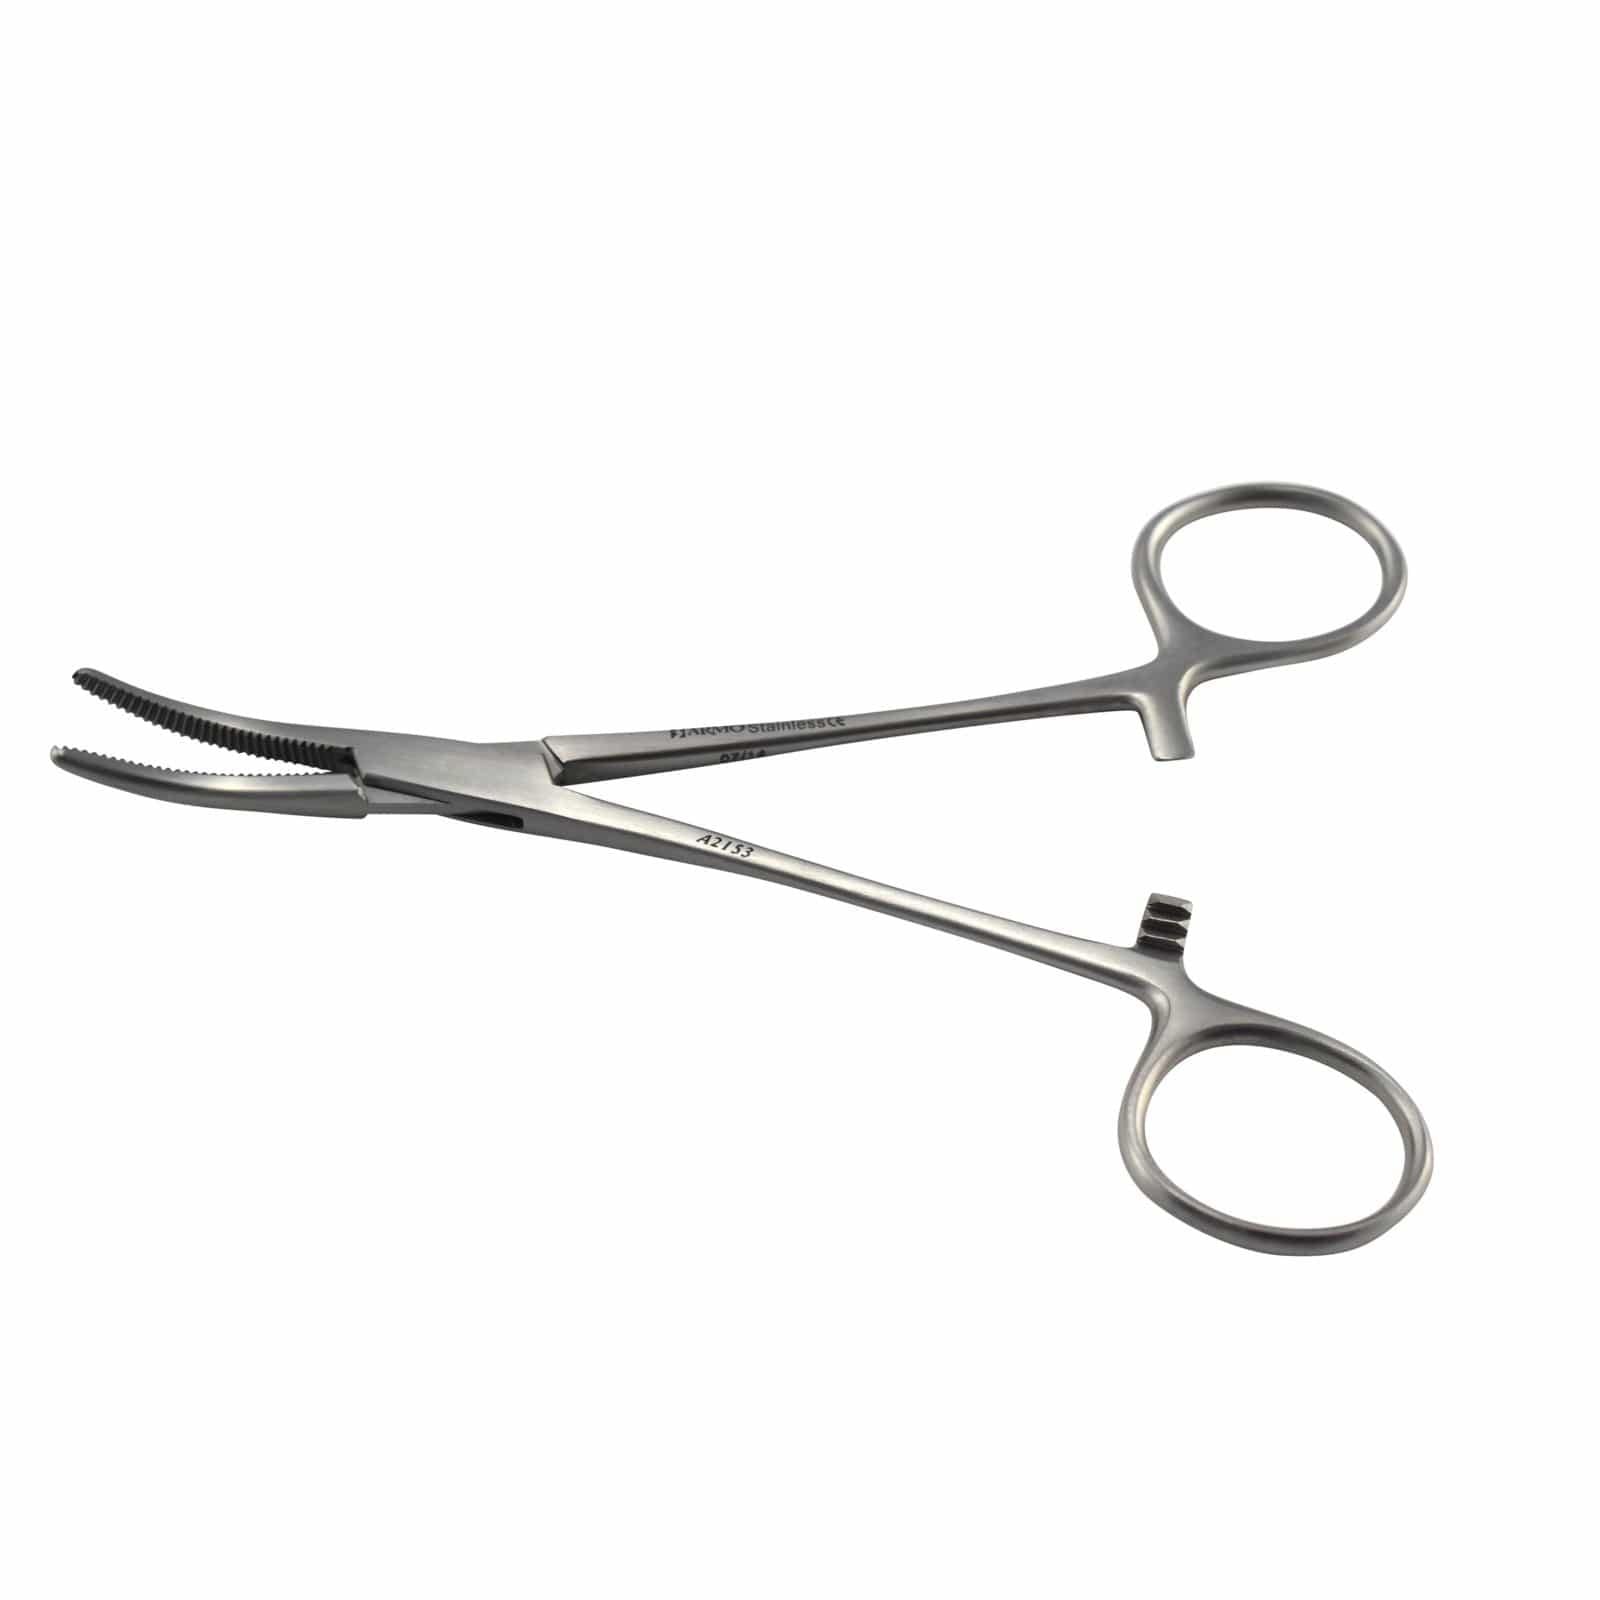 Armo Surgical Instruments 16cm / Curved Armo Spencer Wells Artery Forceps